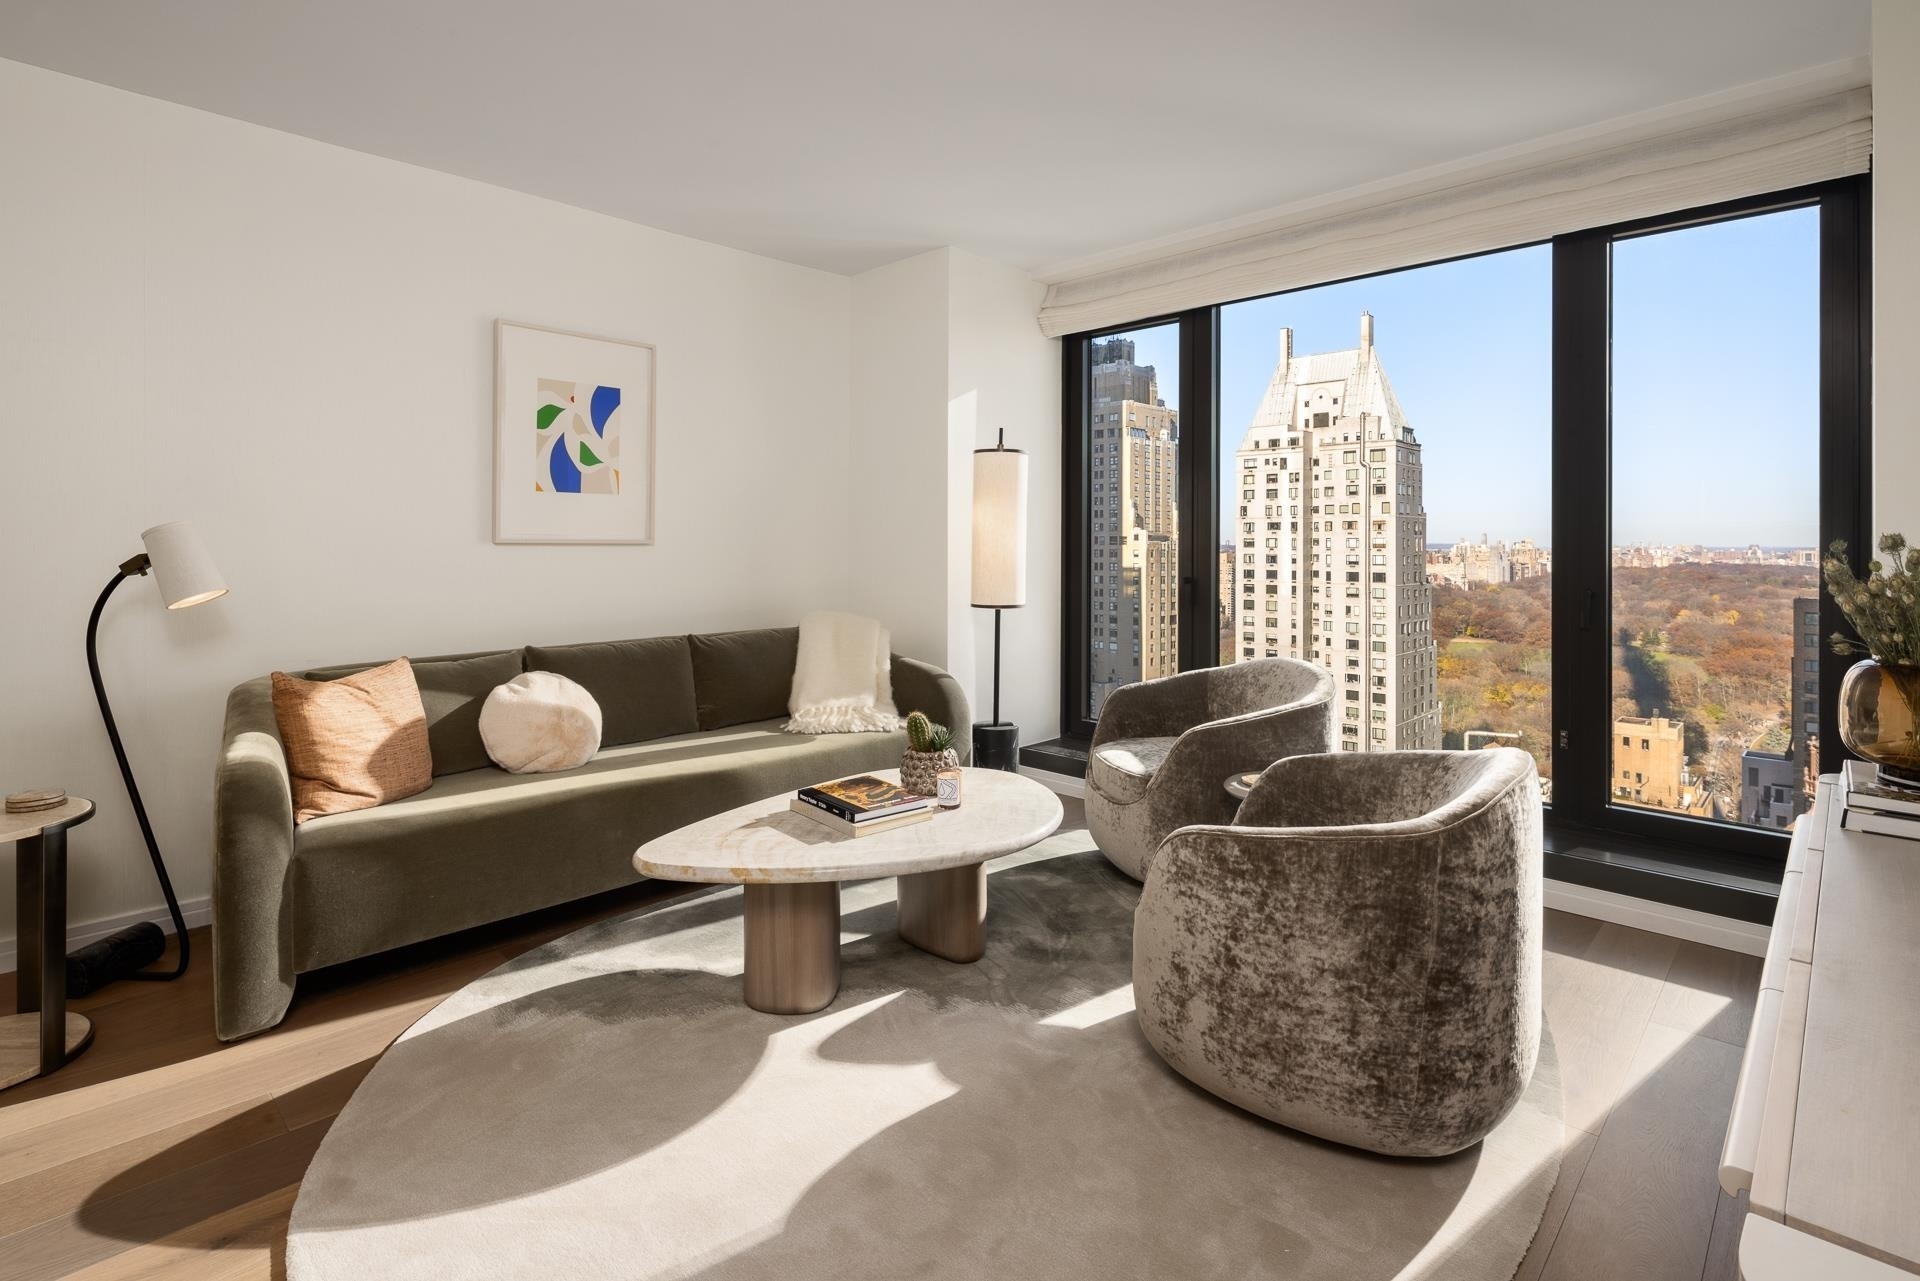 Condominium for Sale at One11, 111 W 56TH ST, 34A Midtown West, New York, NY 10019